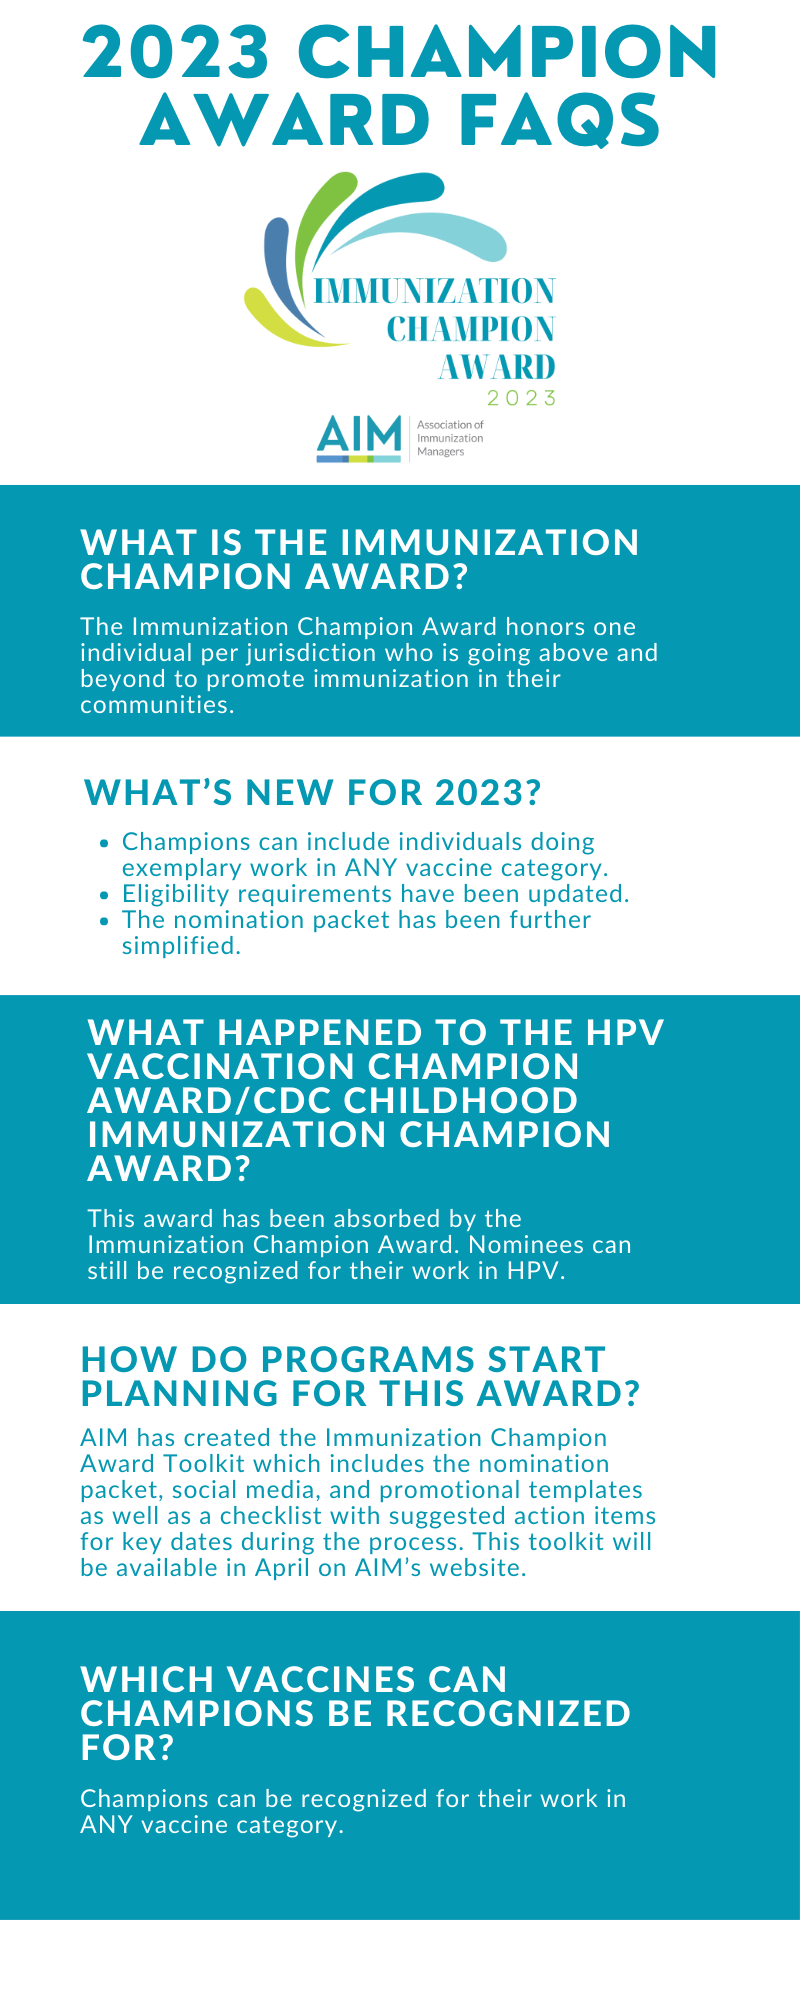 1. What is the Immunization Champion Award? The Immunization Champion Award honors one individual per jurisdiction who is going above and beyond to promote immunization in their communities. 2. What’s new for 2023? Champions can include individuals doing exemplary work in ANY vaccine category, eligibility requirements have been updated, and the nomination packet has been further simplified. 3. What happened to the HPV Vaccination Champion Award/CDC Childhood Immunization Champion Award? This award has been absorbed by the Immunization Champion Award. Nominees can still be recognized for their work in HPV. 4. How do programs start planning for this award? AIM has created the Immunization Champion Award Toolkit which includes the nomination packet, social media, and promotional templates as well as a checklist with suggested action items for key dates during the process. This toolkit will be available in April on AIM’s website. 5. Which vaccines can Champions be recognized for? Champions can be recognized for their work in ANY vaccine category.